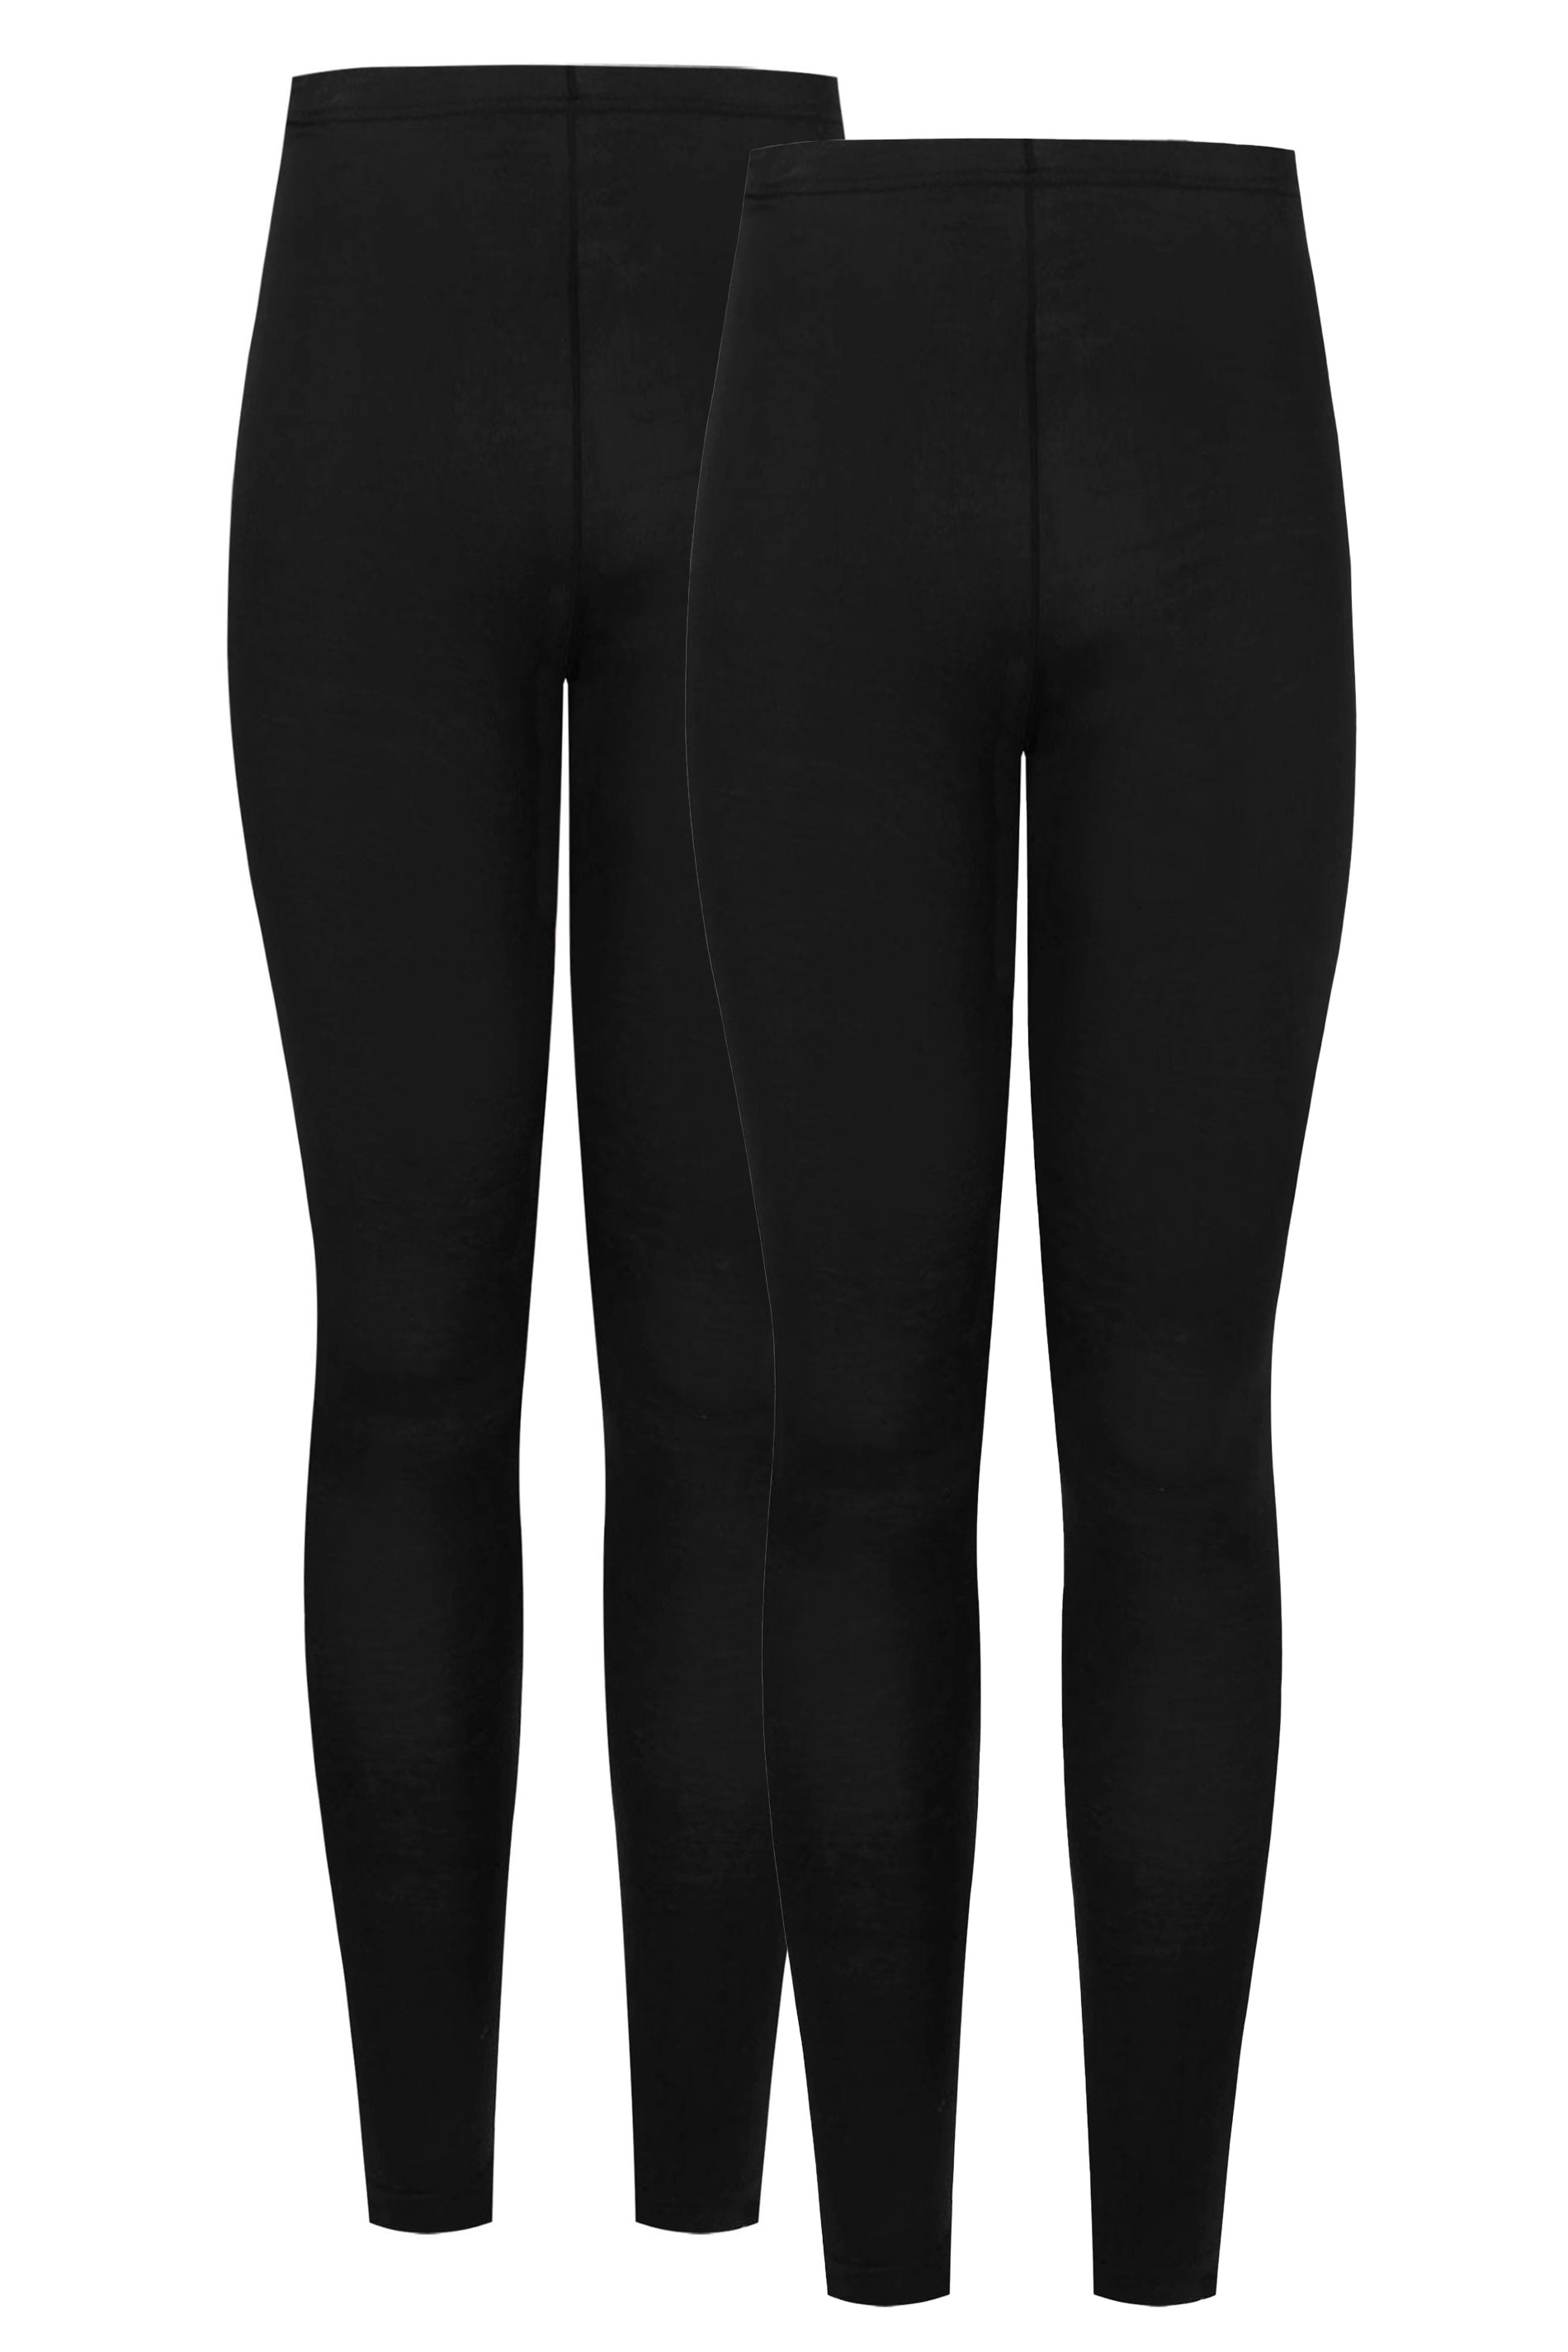 LTS MADE FOR GOOD 2 PACK Black Cotton Leggings | Long Tall Sally  1